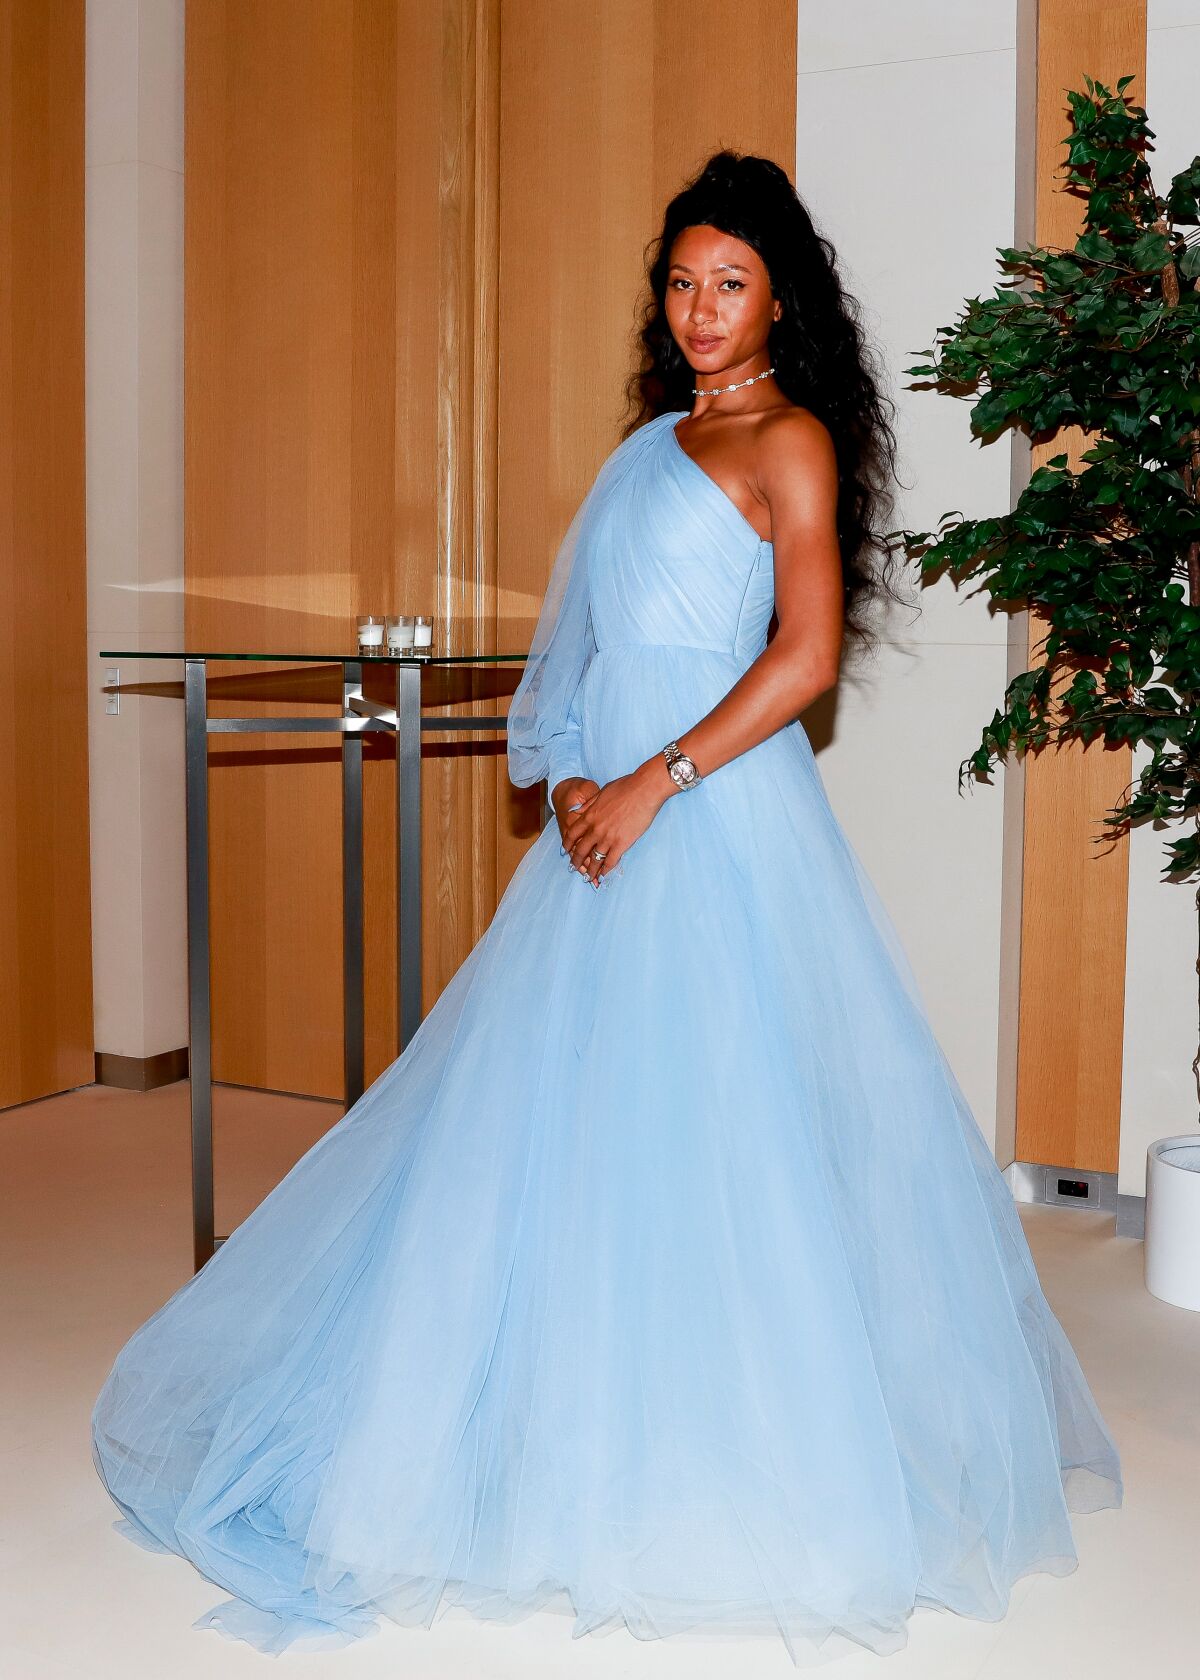 A woman with long dark hair in an ice blue one-shoulder full-skirted gown.